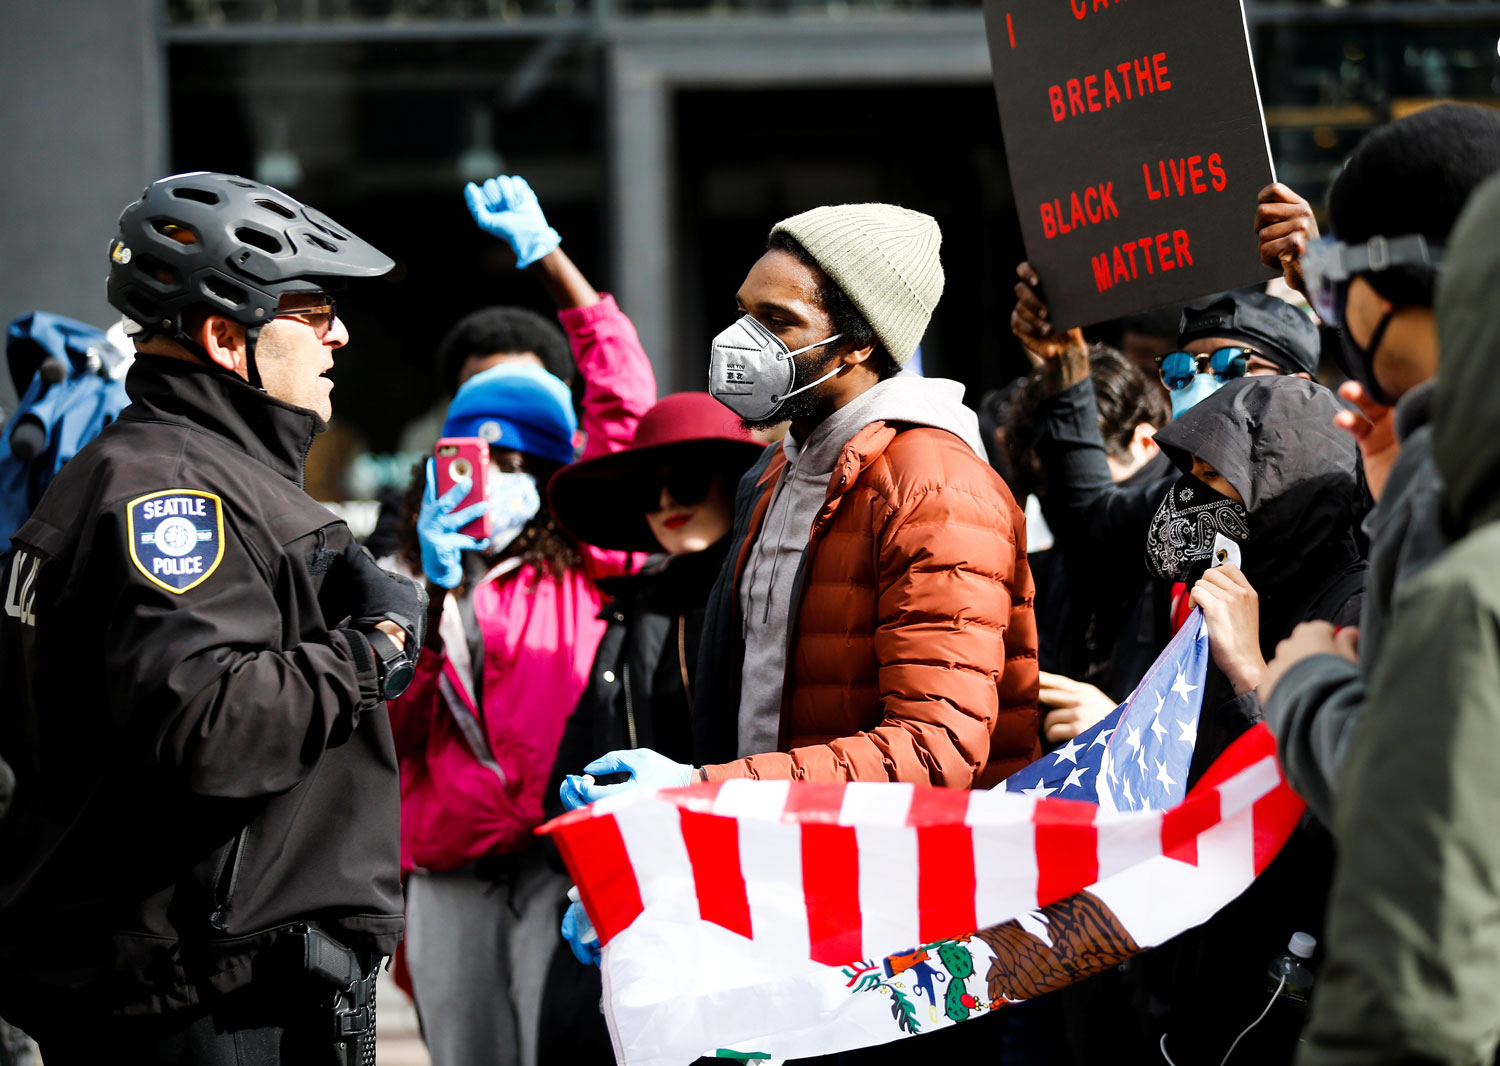 A Seattle police officer stands before a crowd of protesters.